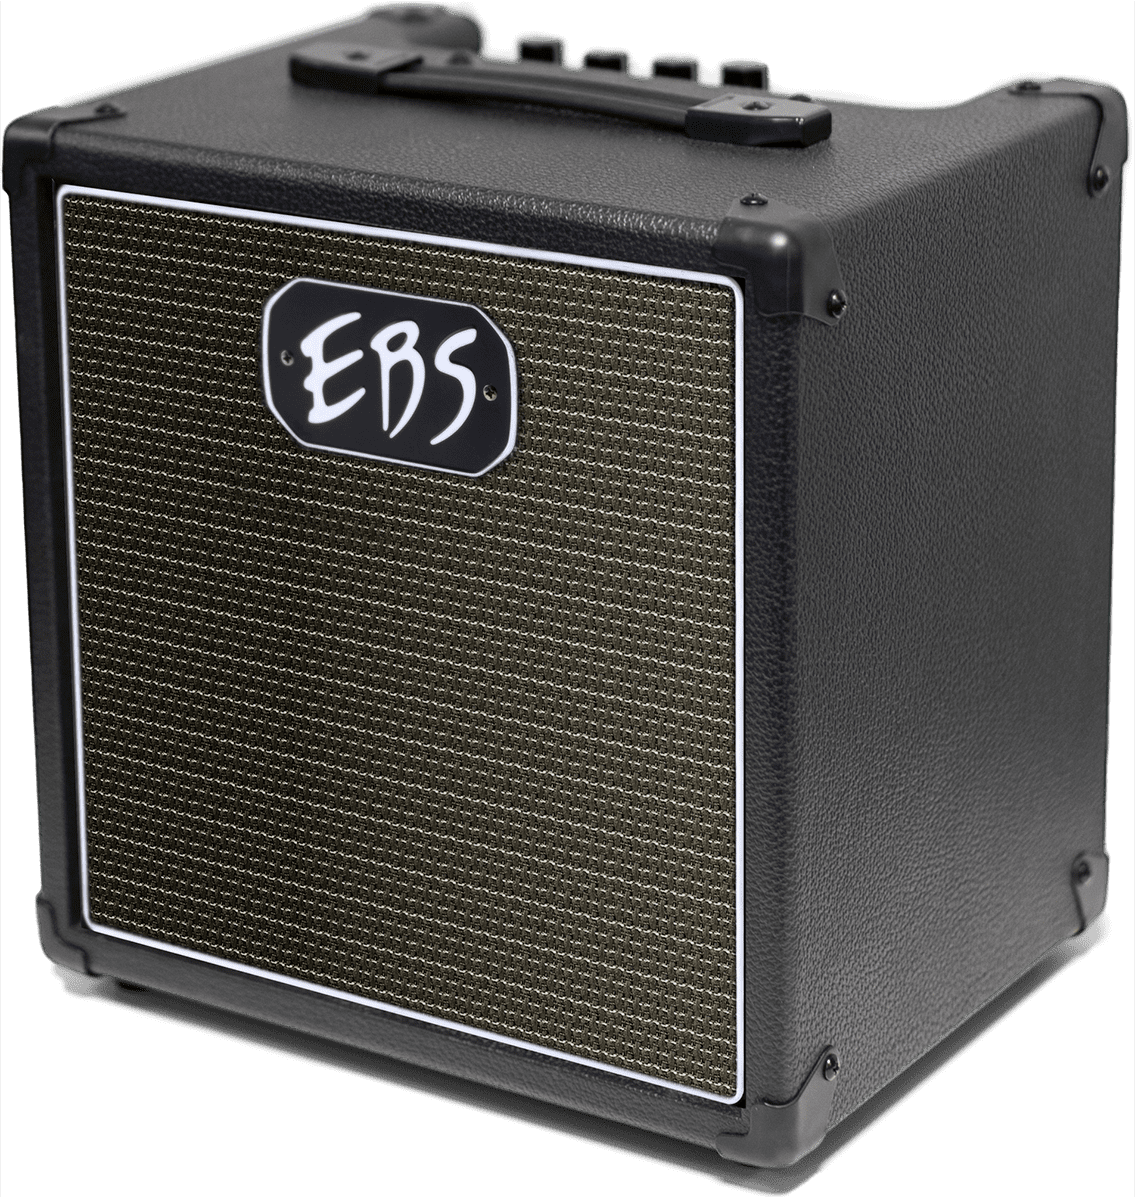 Ebs Session 30 Mk3 1x8 30 W - Bass combo amp - Main picture